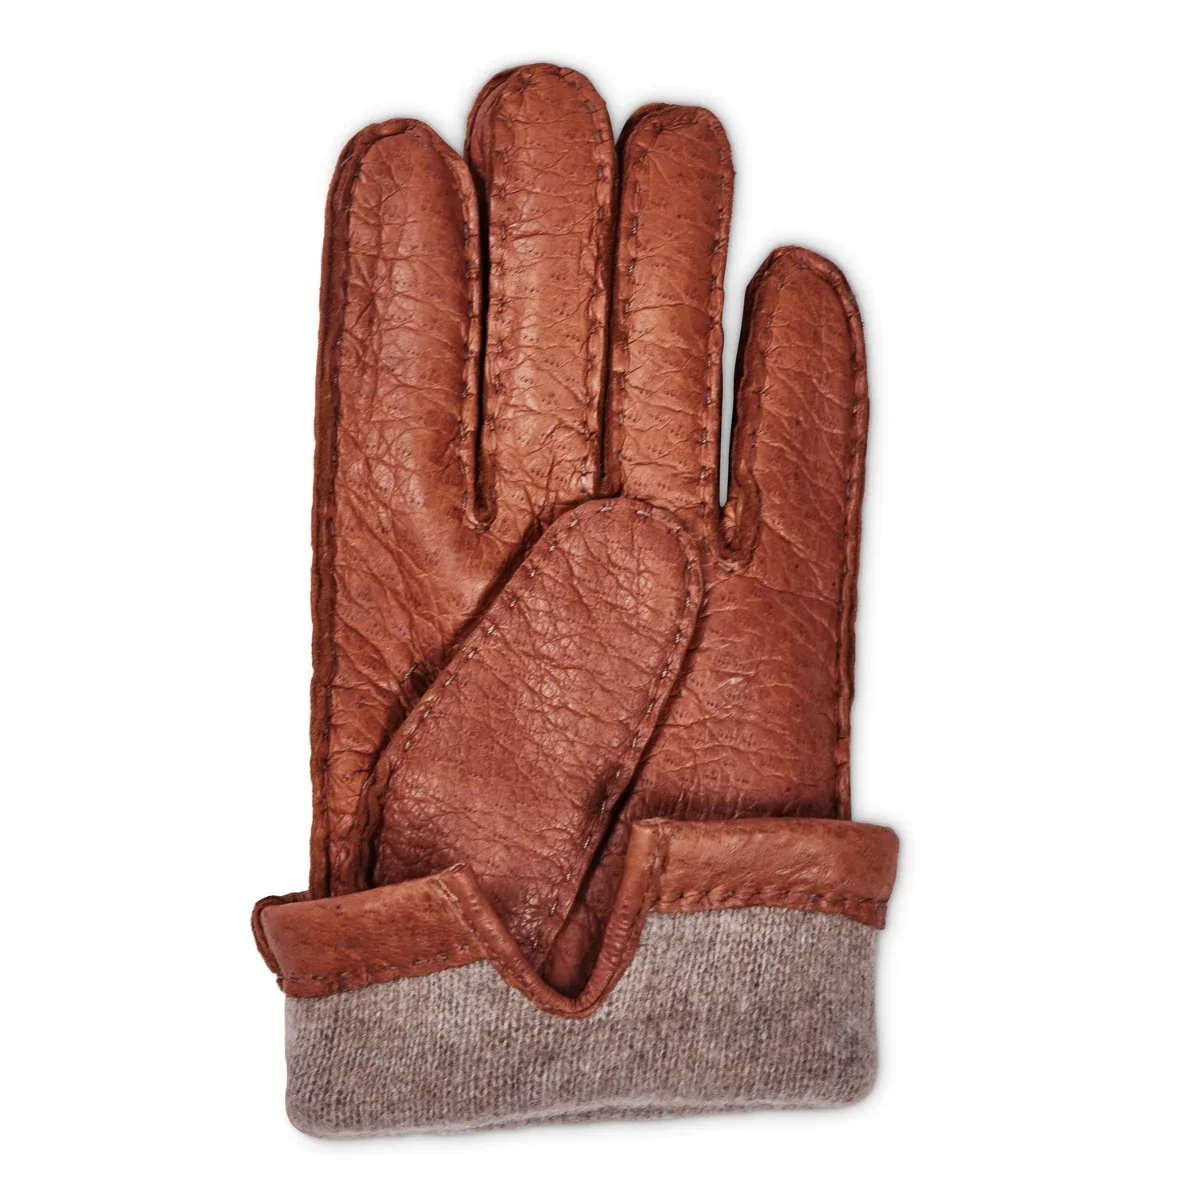 Image of Sovereign Grade Medium Brown Peccary Leather Gloves, Cashmere Lined